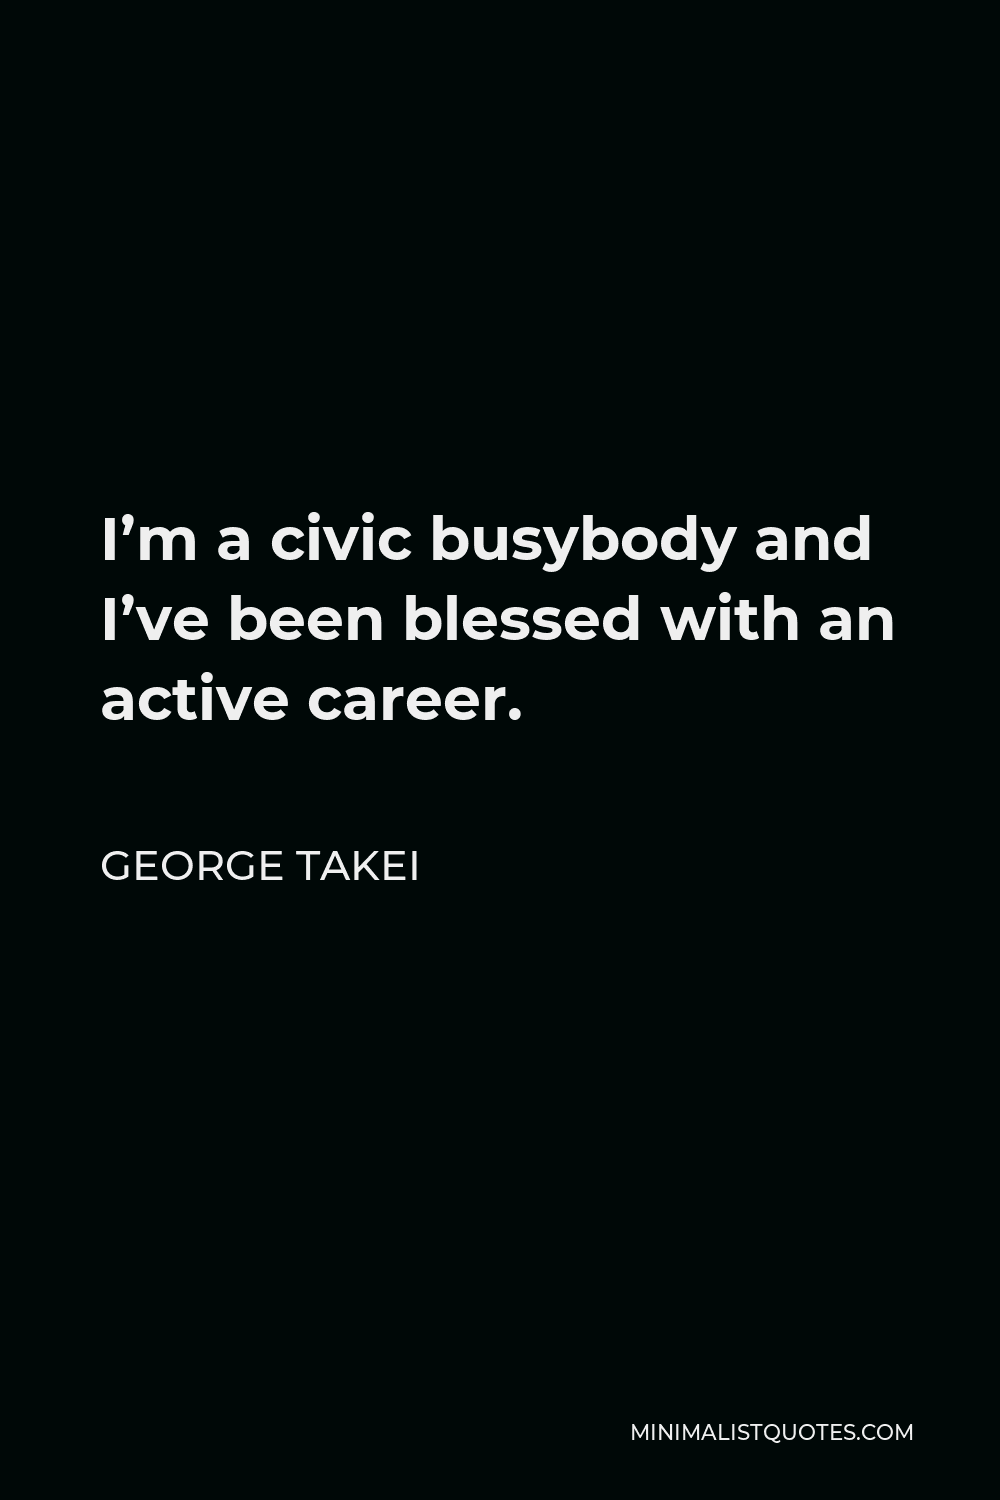 George Takei Quote - I’m a civic busybody and I’ve been blessed with an active career.